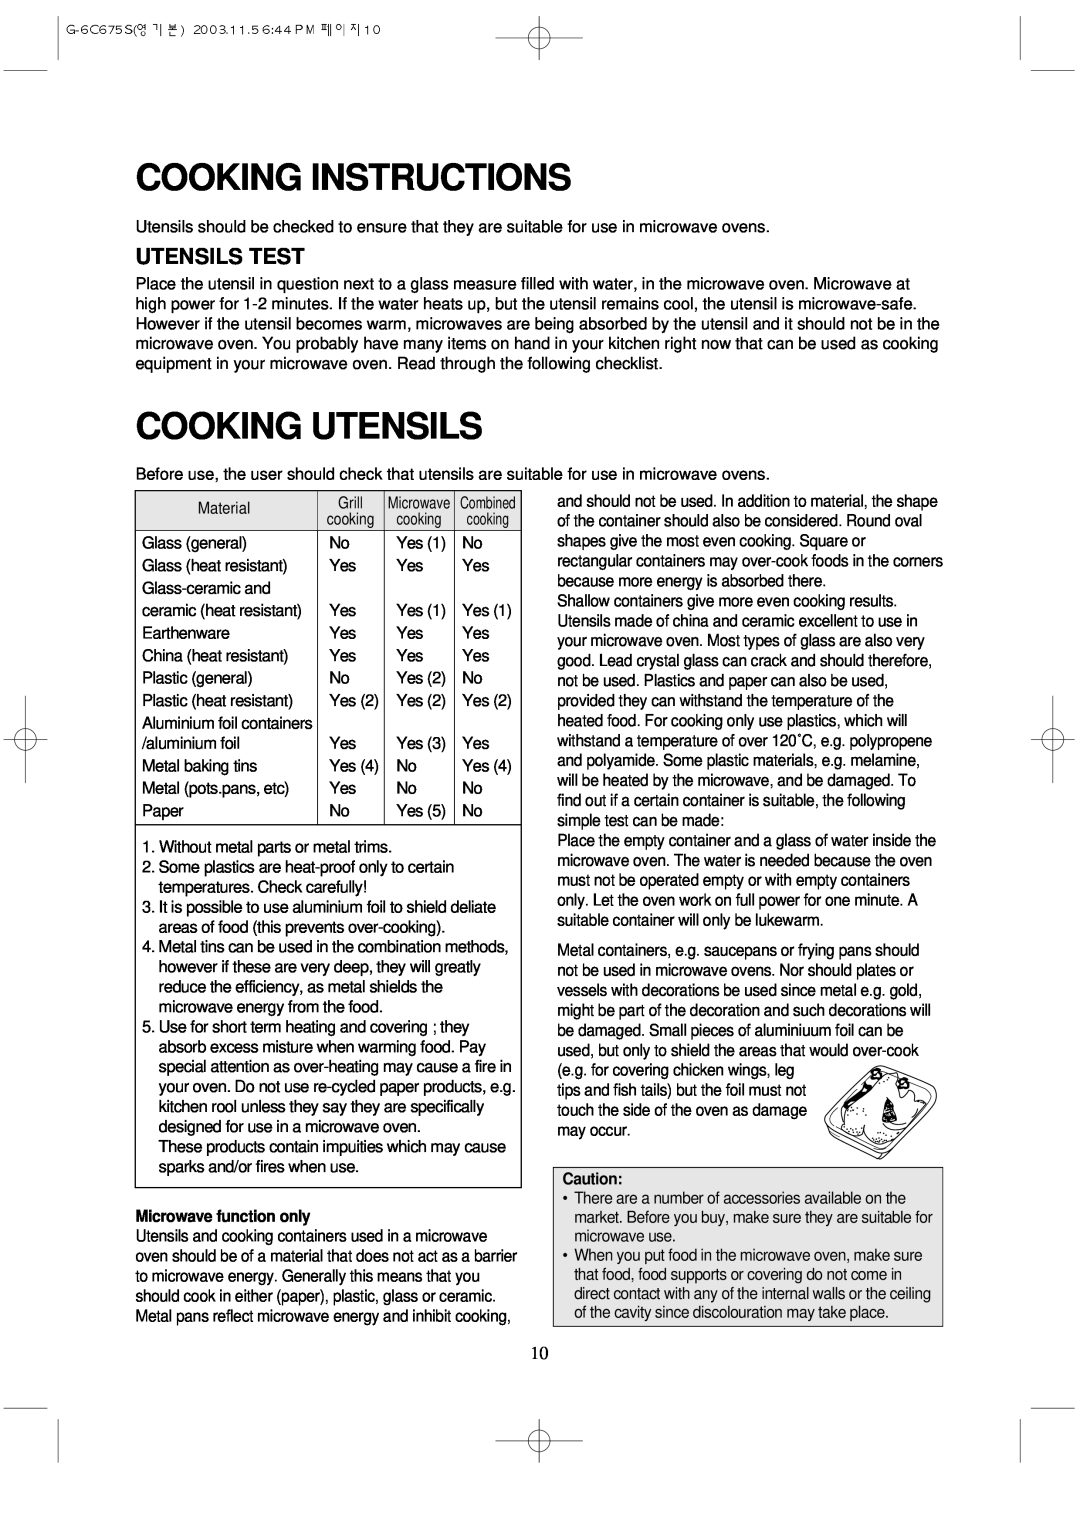 Daewoo KOG-3C675S manual Cooking Instructions, Cooking Utensils, Utensils Test, Microwave function only 